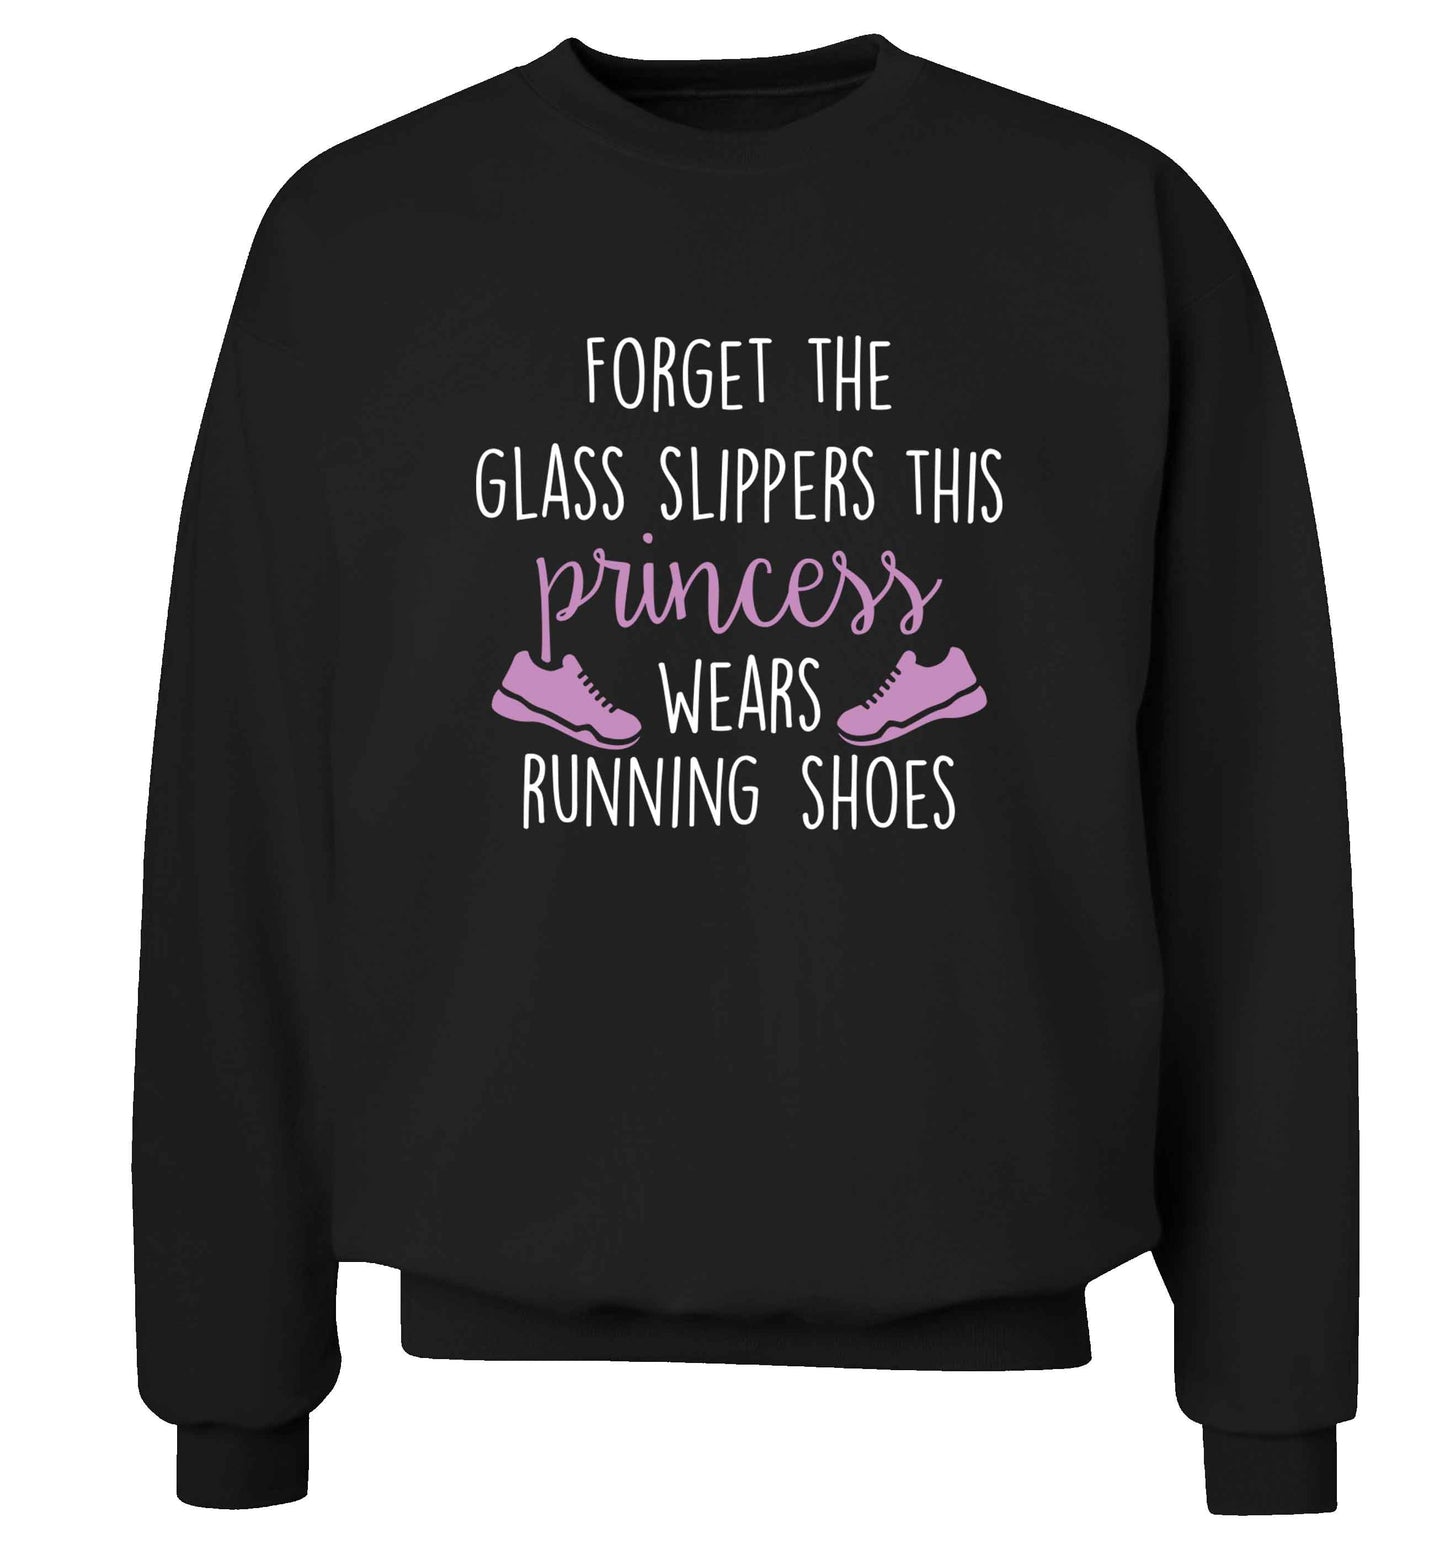 Forget the glass slippers this princess wears running shoes adult's unisex black sweater 2XL